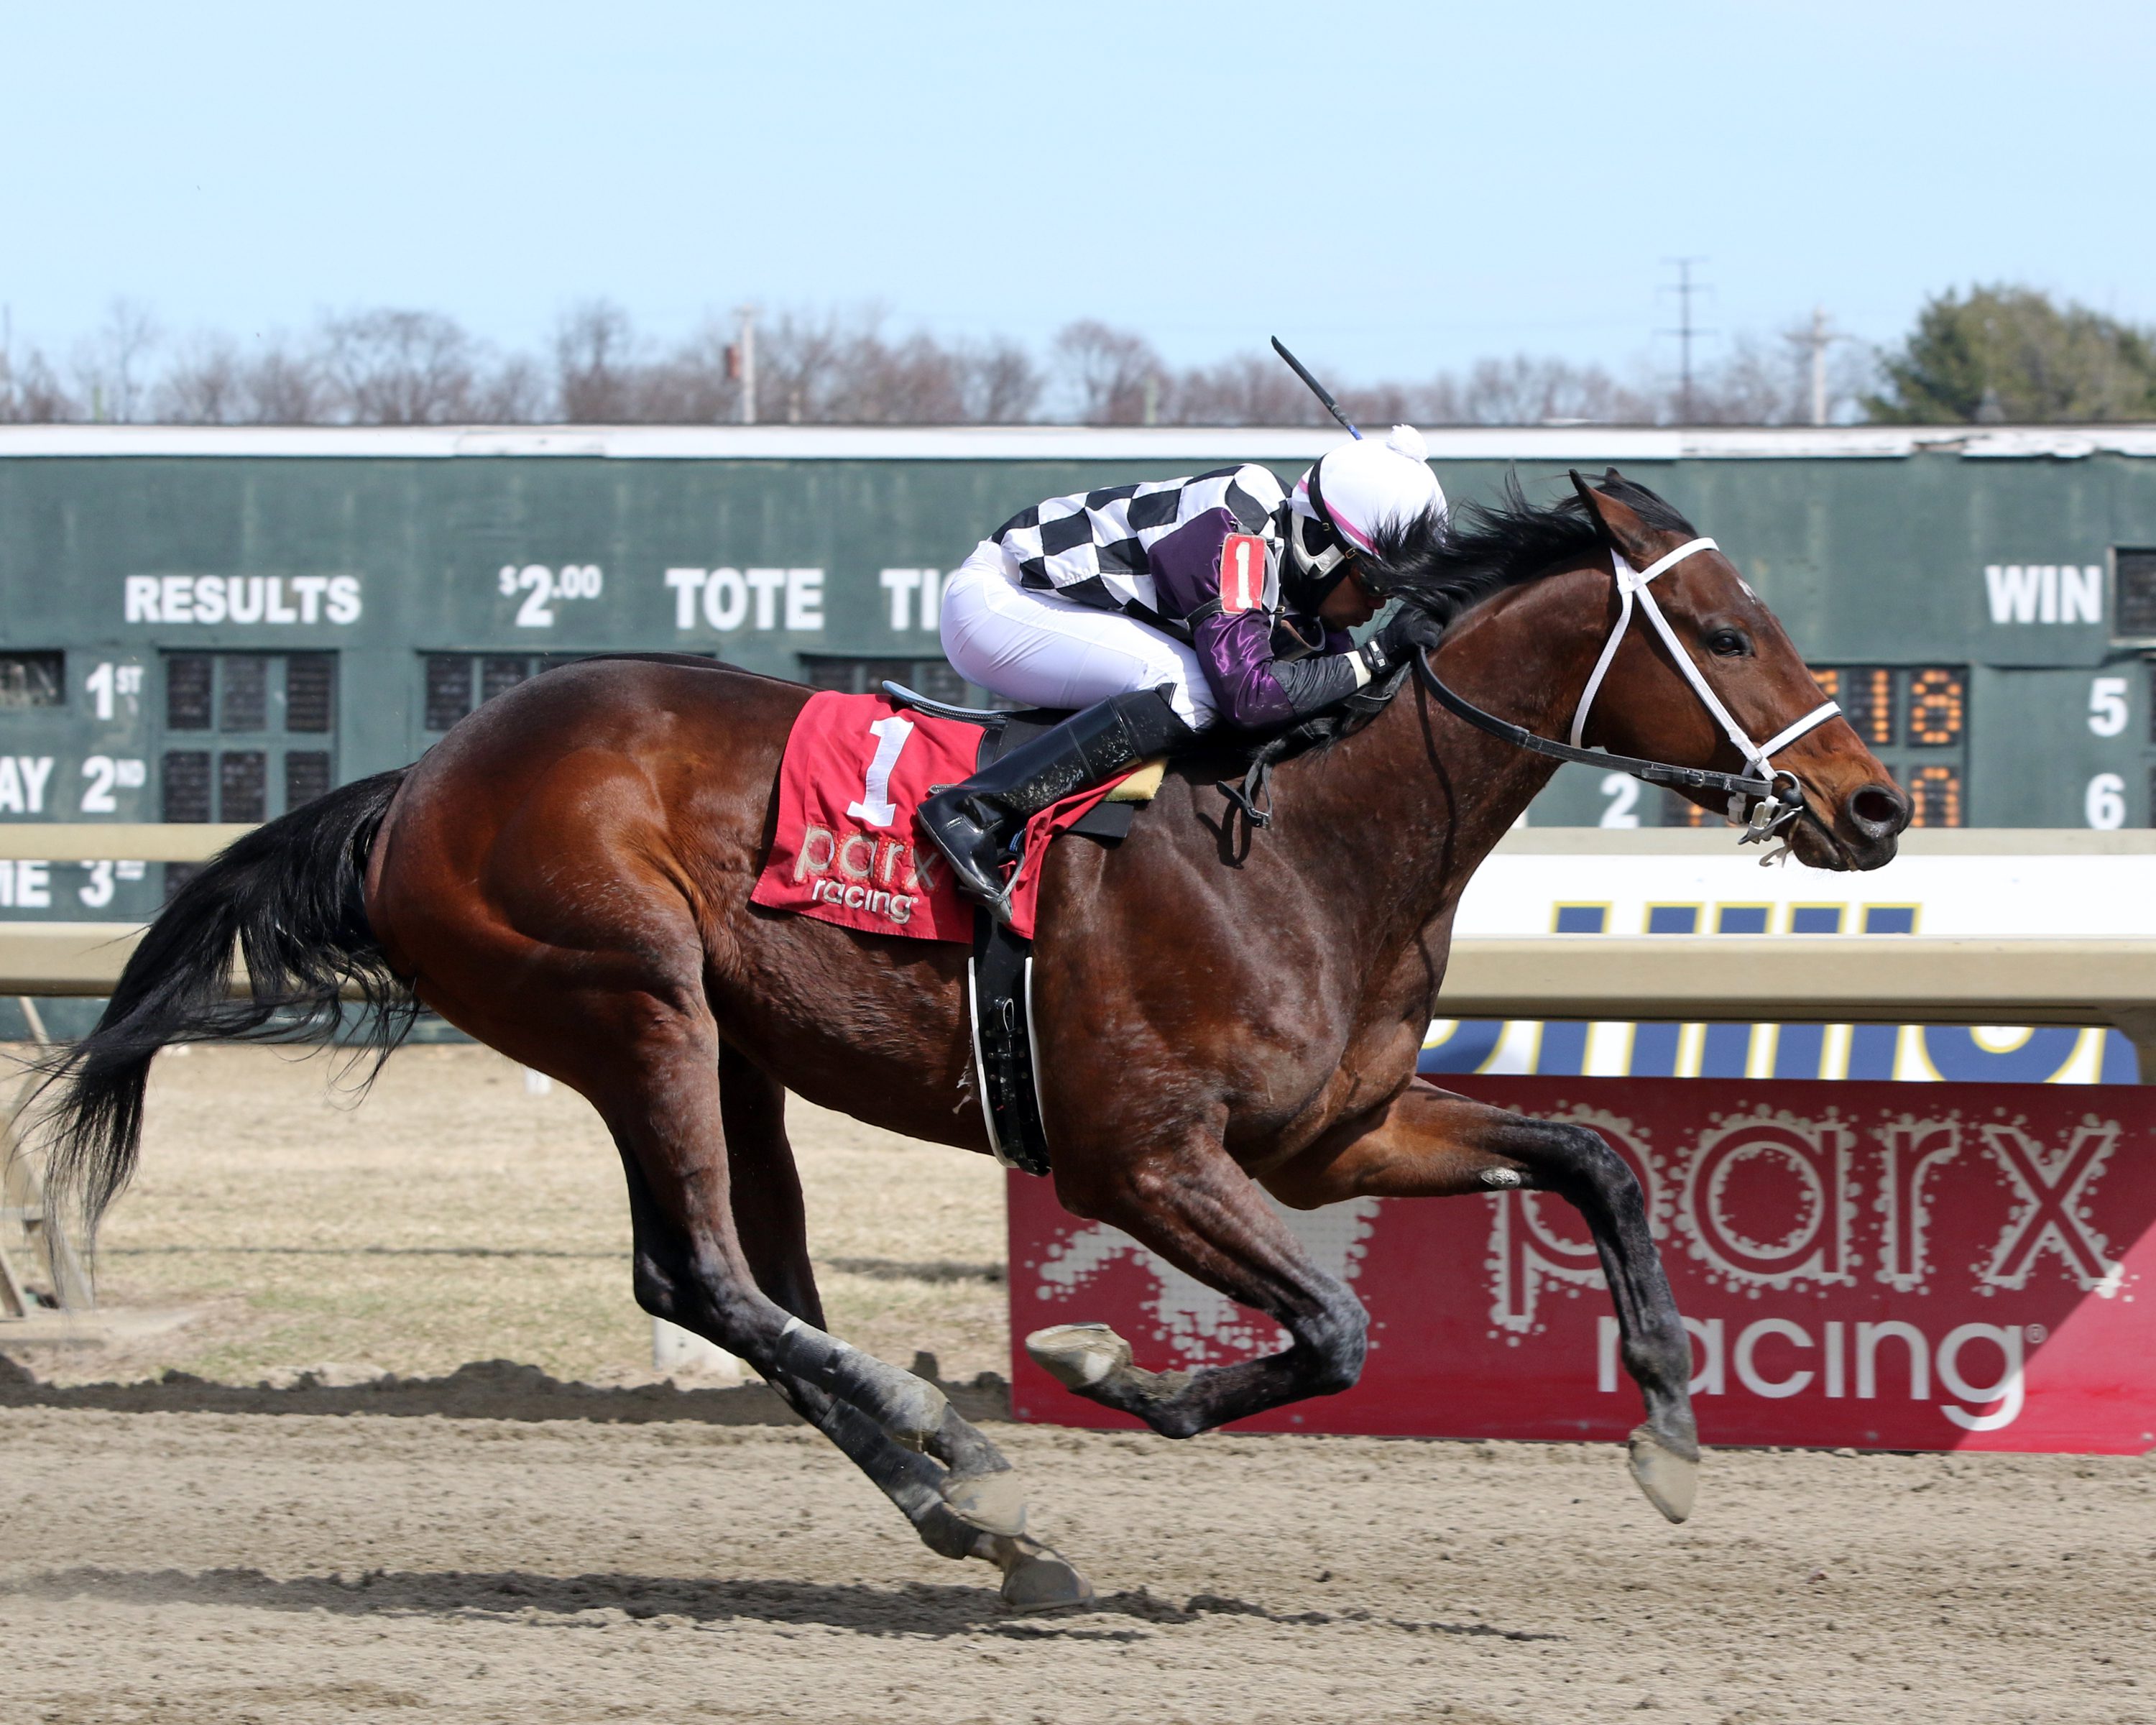 Far Mo Power with Dexter Haddock win Race 1 at Parx on March 8, 2022. Photo By: Chad B. Harmon